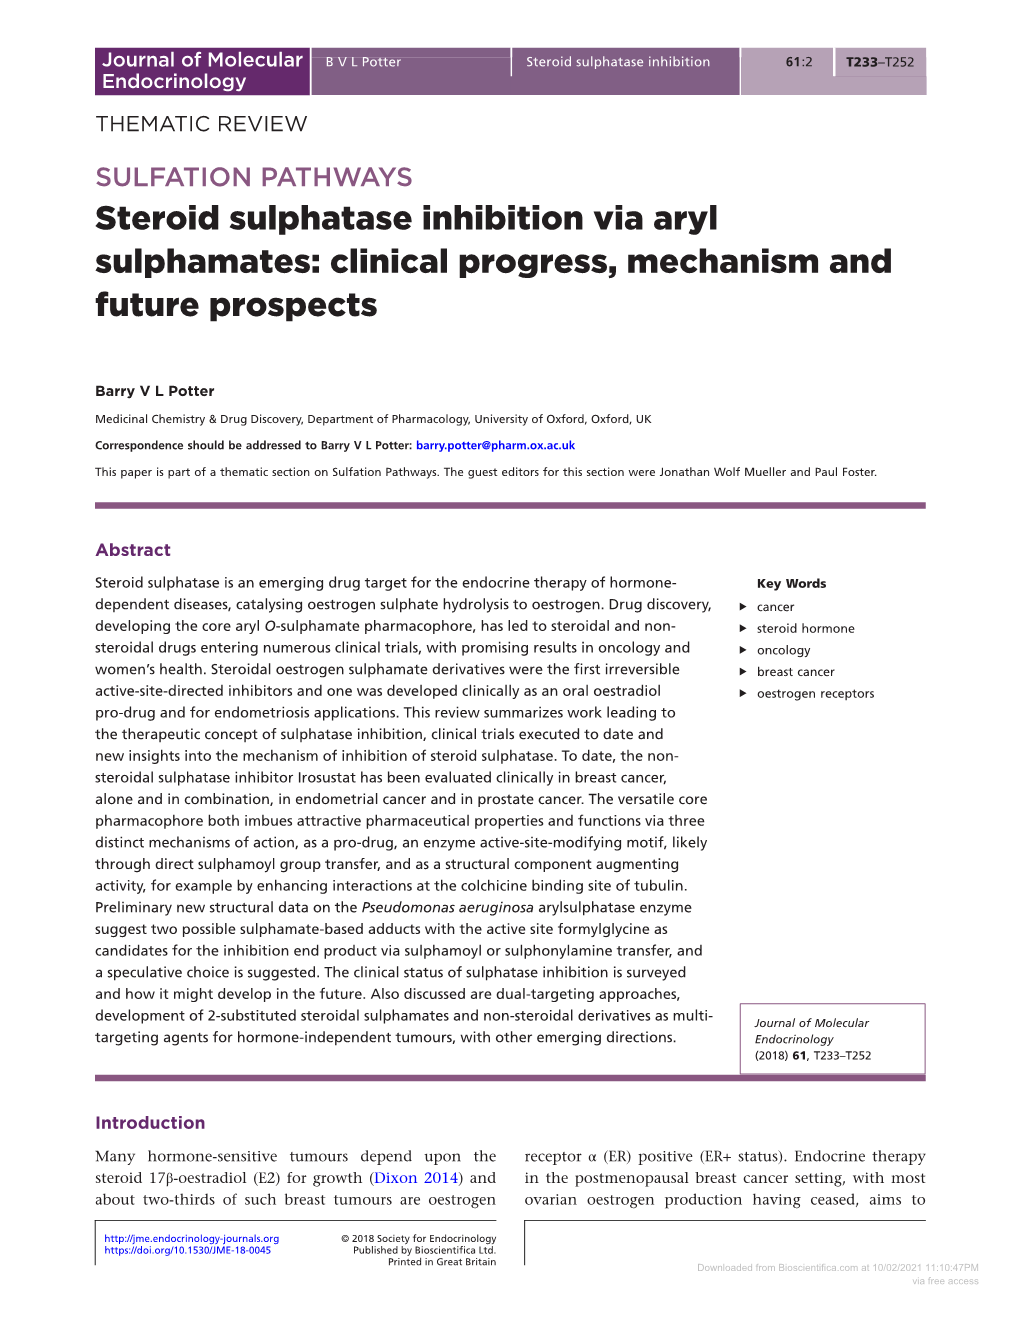 Steroid Sulphatase Inhibition Via Aryl Sulphamates: Clinical Progress, Mechanism and Future Prospects